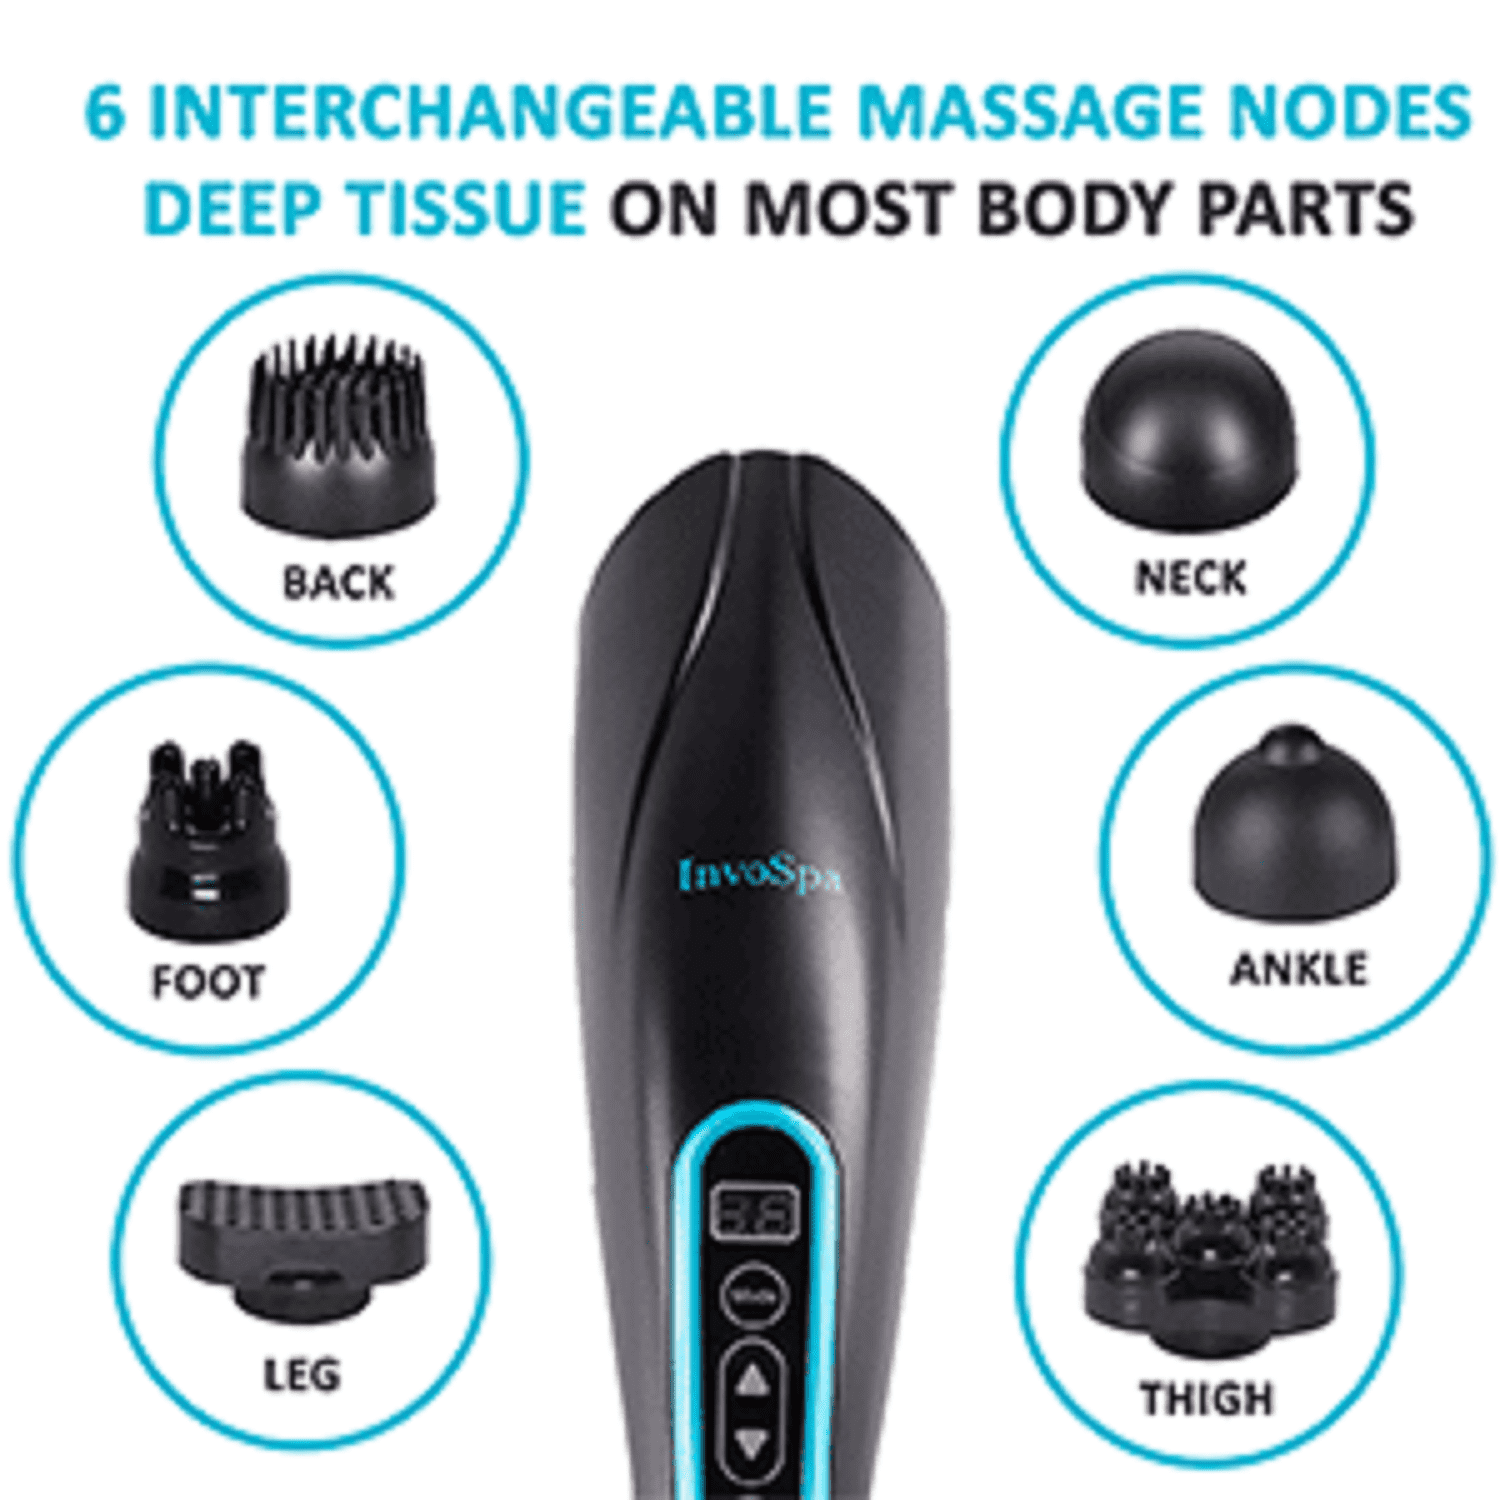 InvoSpa HHMG-8799 Handheld Deep Tissue Massager 6 Interchangeable Nodes 10  Speeds 12 Percussion Modes for Muscles, Back, Foot, Neck, Shoulder, Leg,  Calf Pain Relief Full Body Massage. 6.5' power cord 